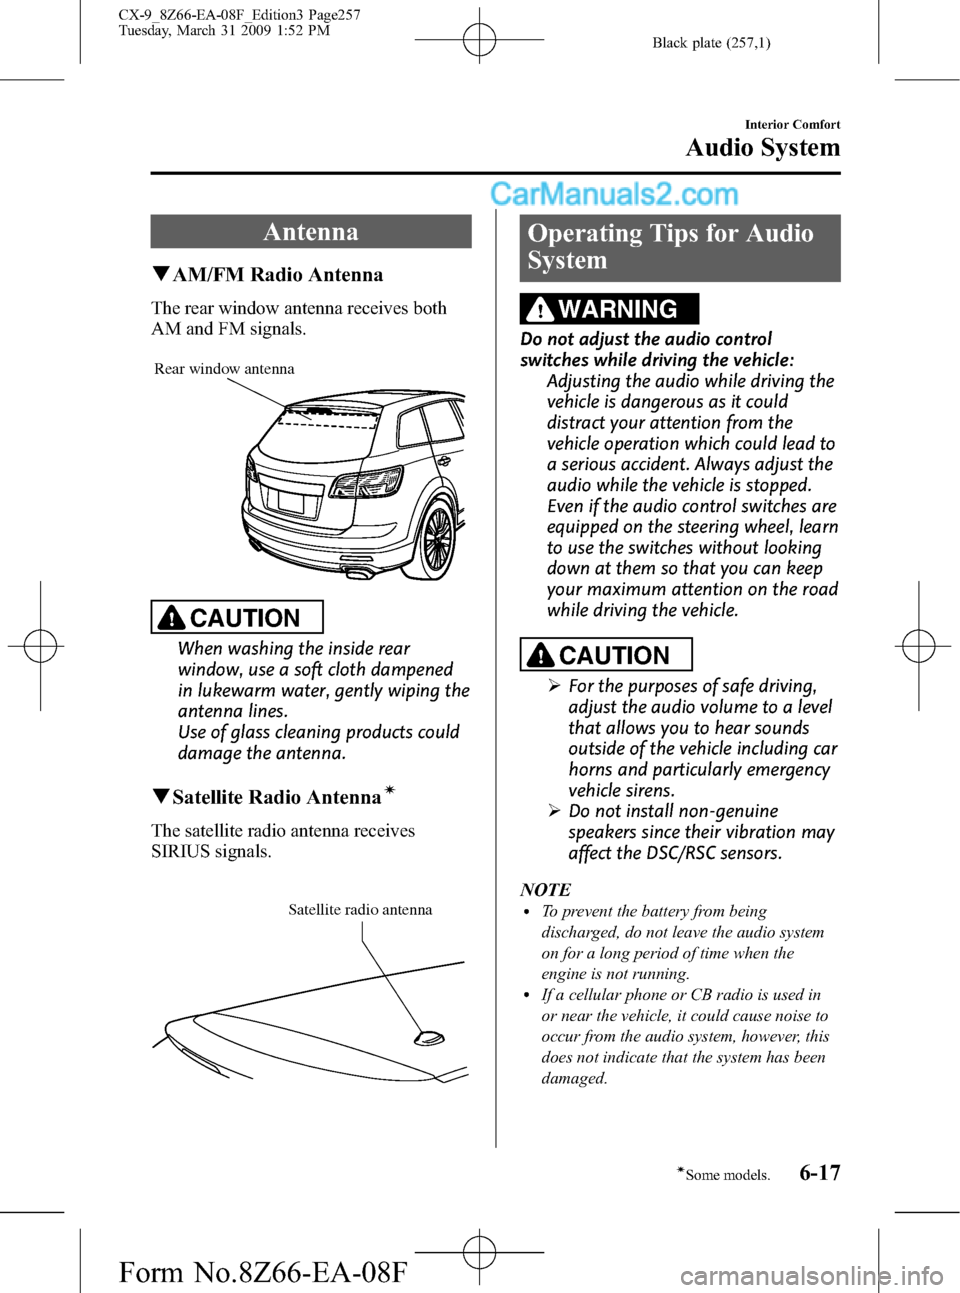 MAZDA MODEL CX-9 2009  Owners Manual (in English) Black plate (257,1)
Antenna
qAM/FM Radio Antenna
The rear window antenna receives both
AM and FM signals.
Rear window antenna
CAUTION
When washing the inside rear
window, use a soft cloth dampened
in 